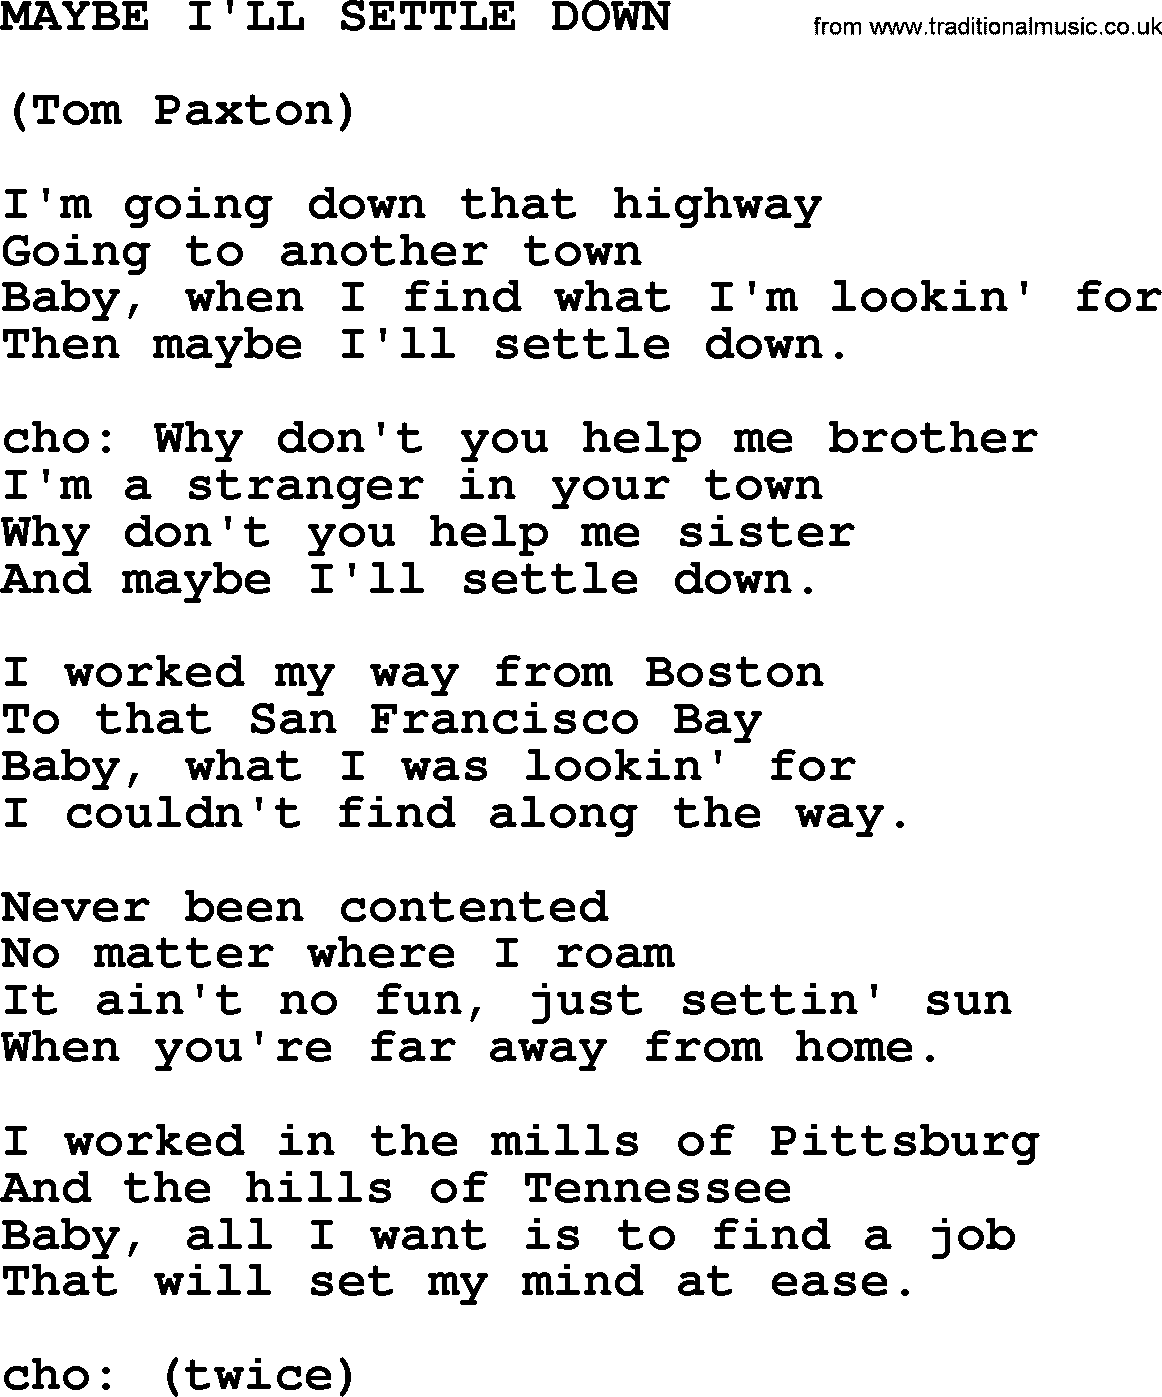 Tom Paxton song: Maybe I'll Settle Down, lyrics